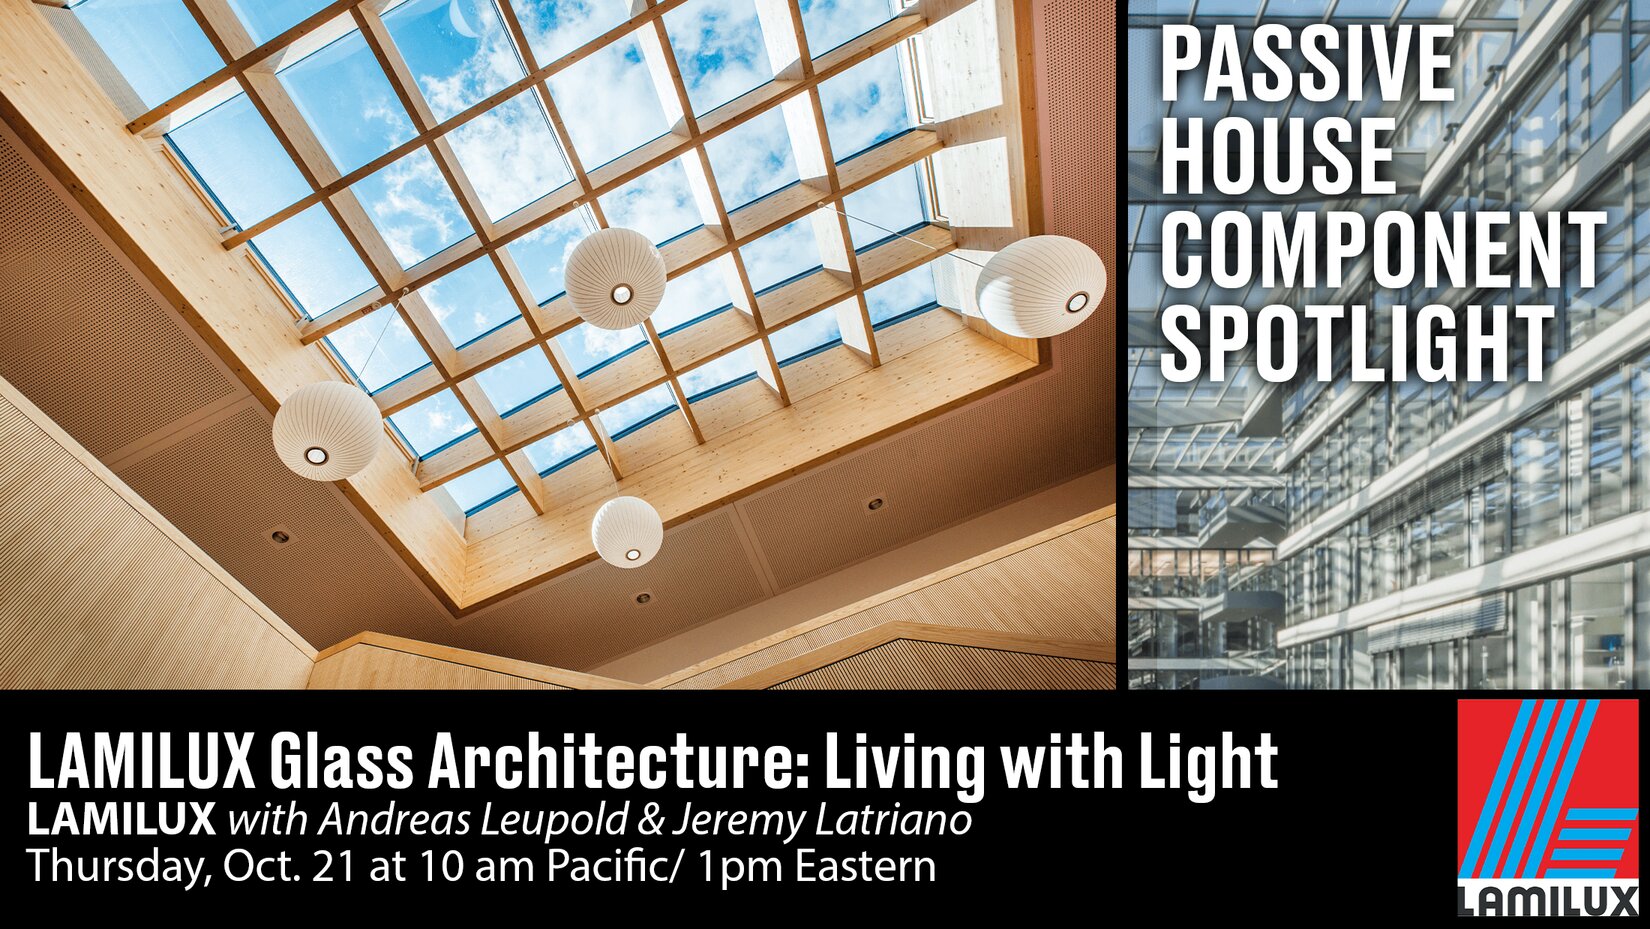 LAMILUX Glass Architecture Component Spotlight: Living with Light